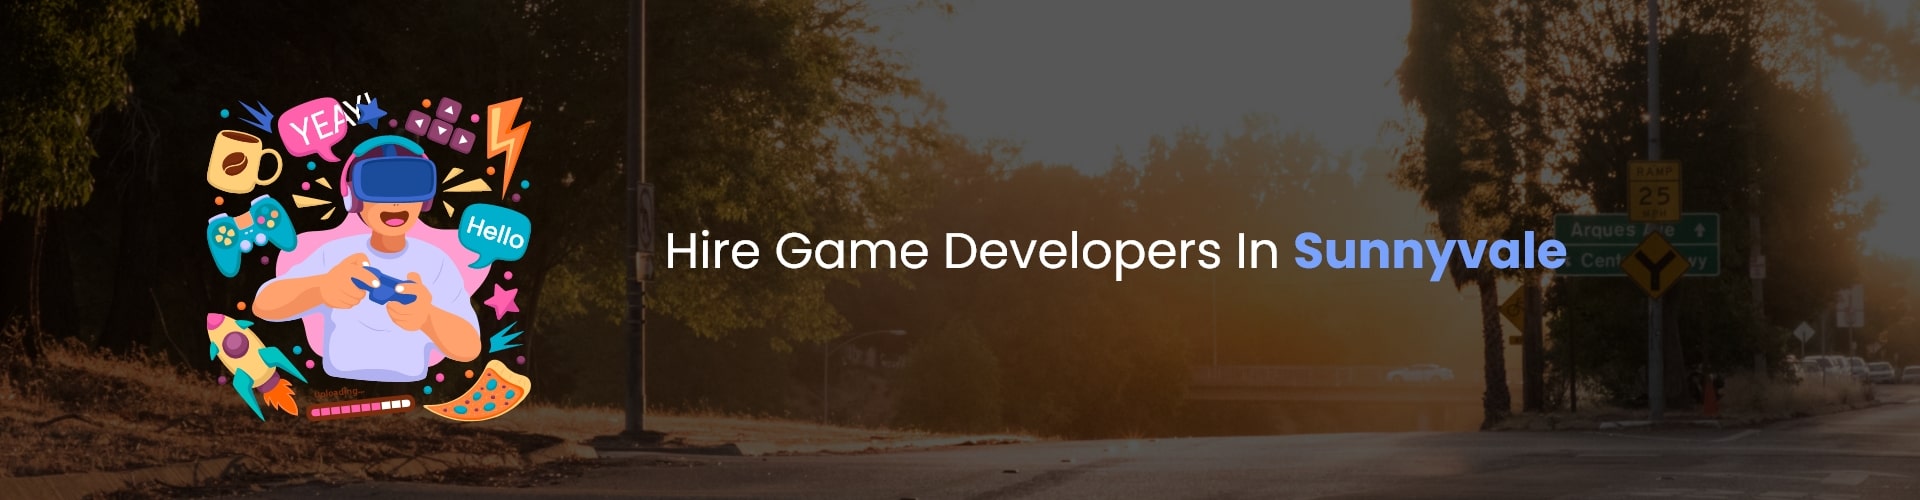 hire game developers in sunnyvale